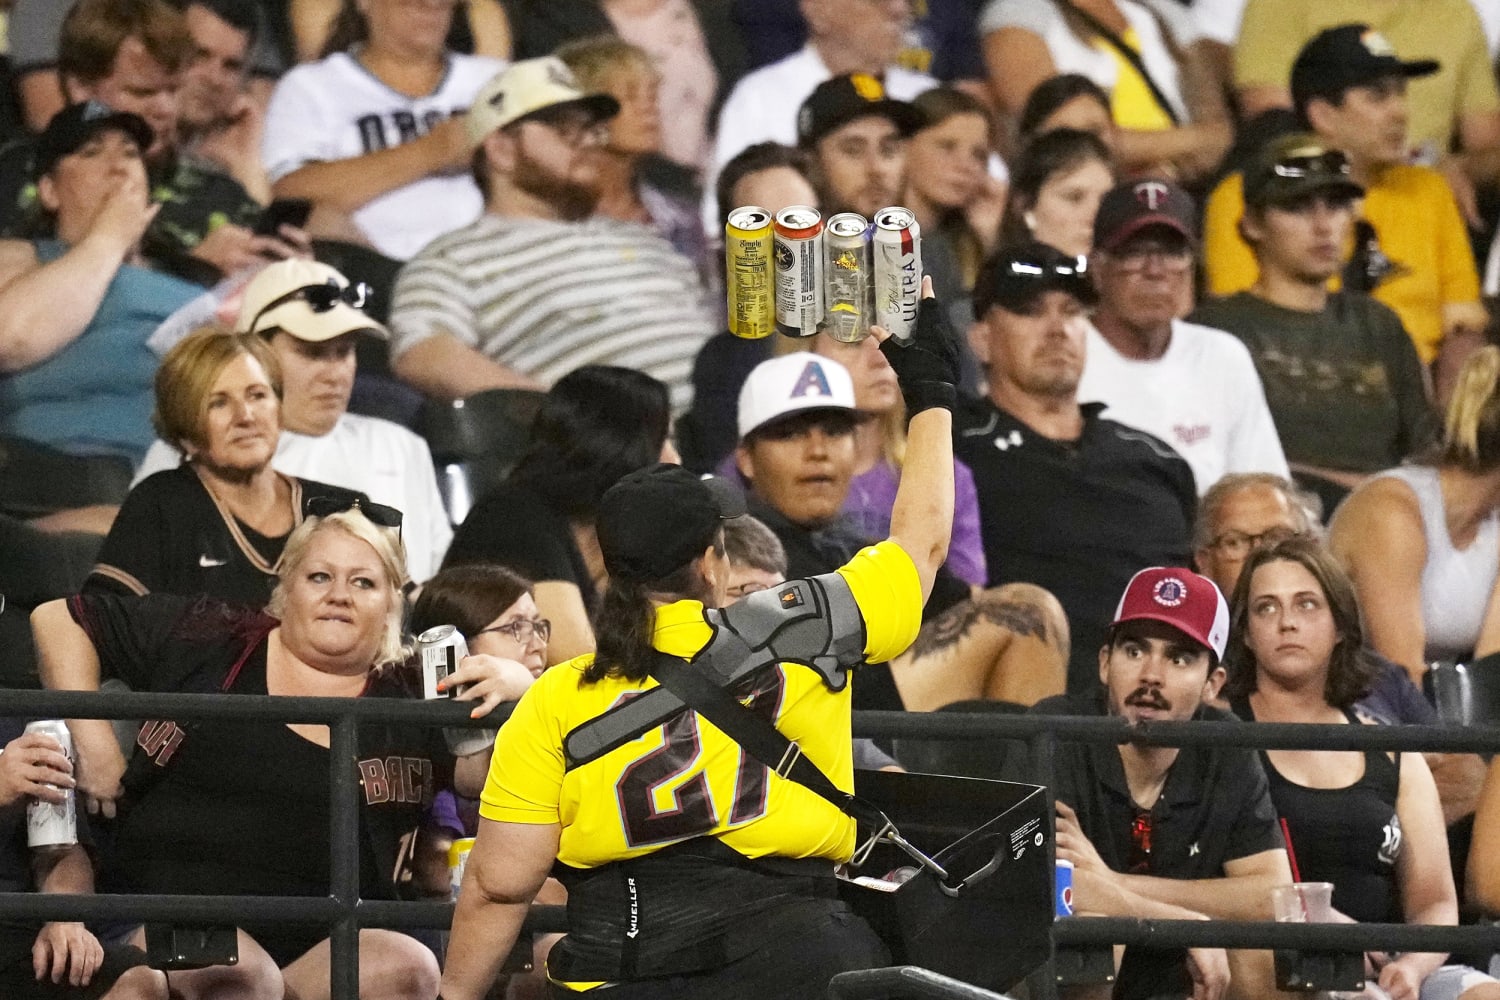 With new rules, MLB to draw more than 70 million fans, highest